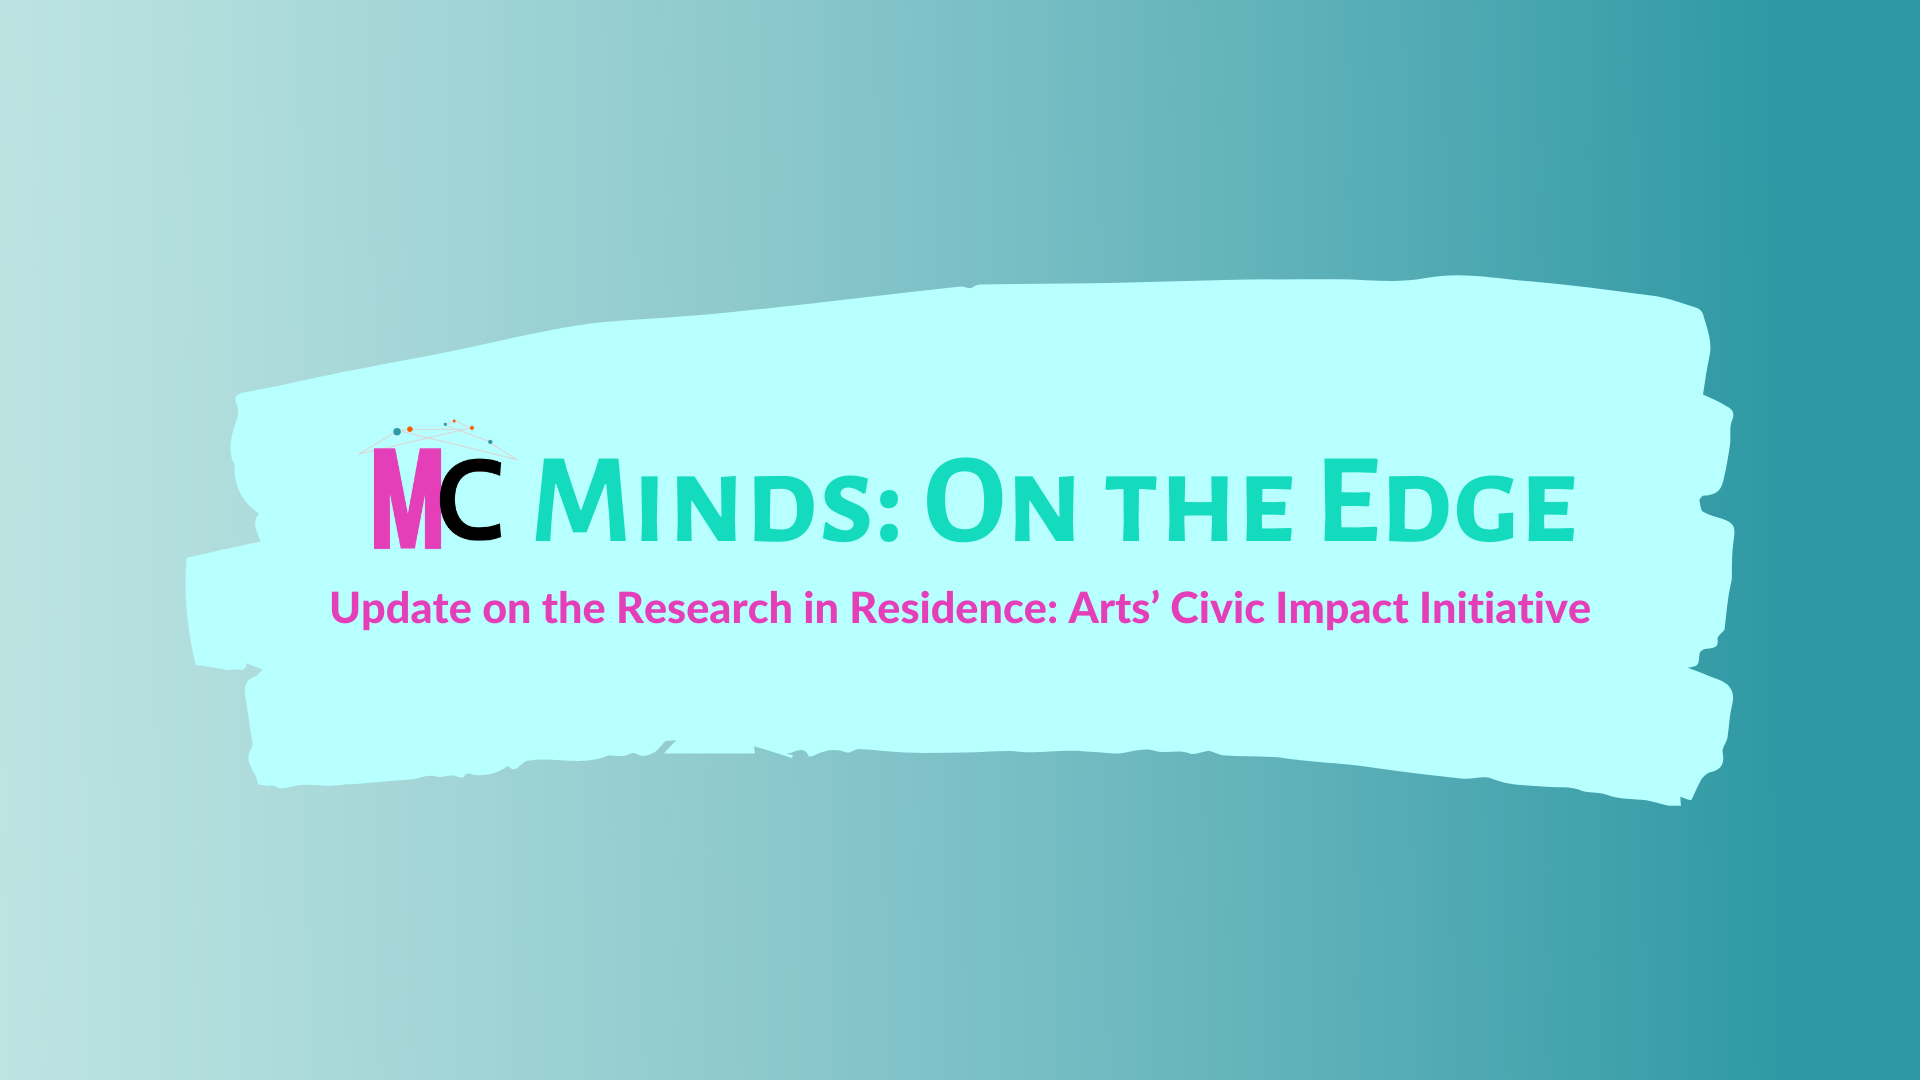 MC MINDS ON THE EDGE blog_Research in Residence Spring update